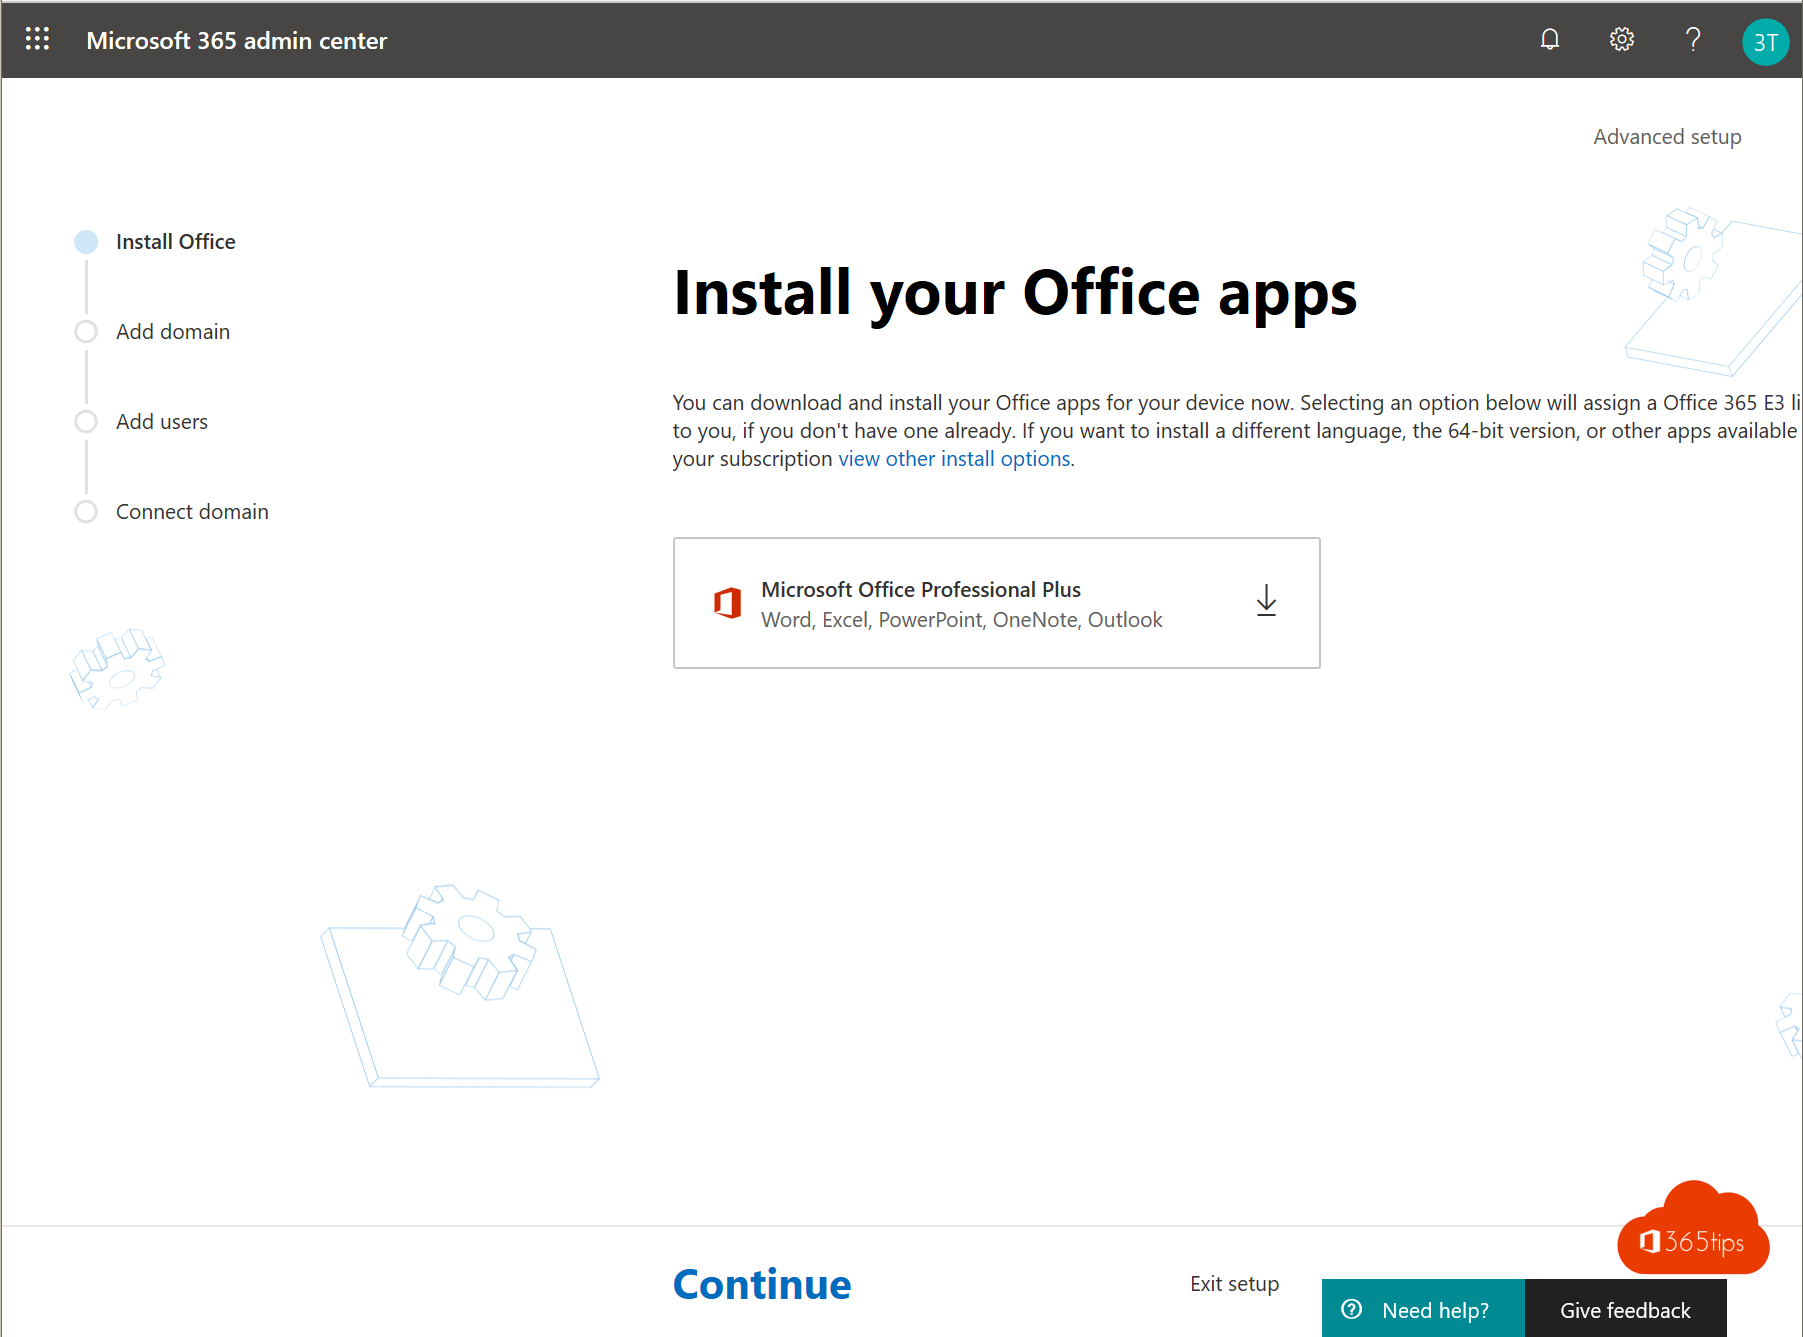 Install your office apps